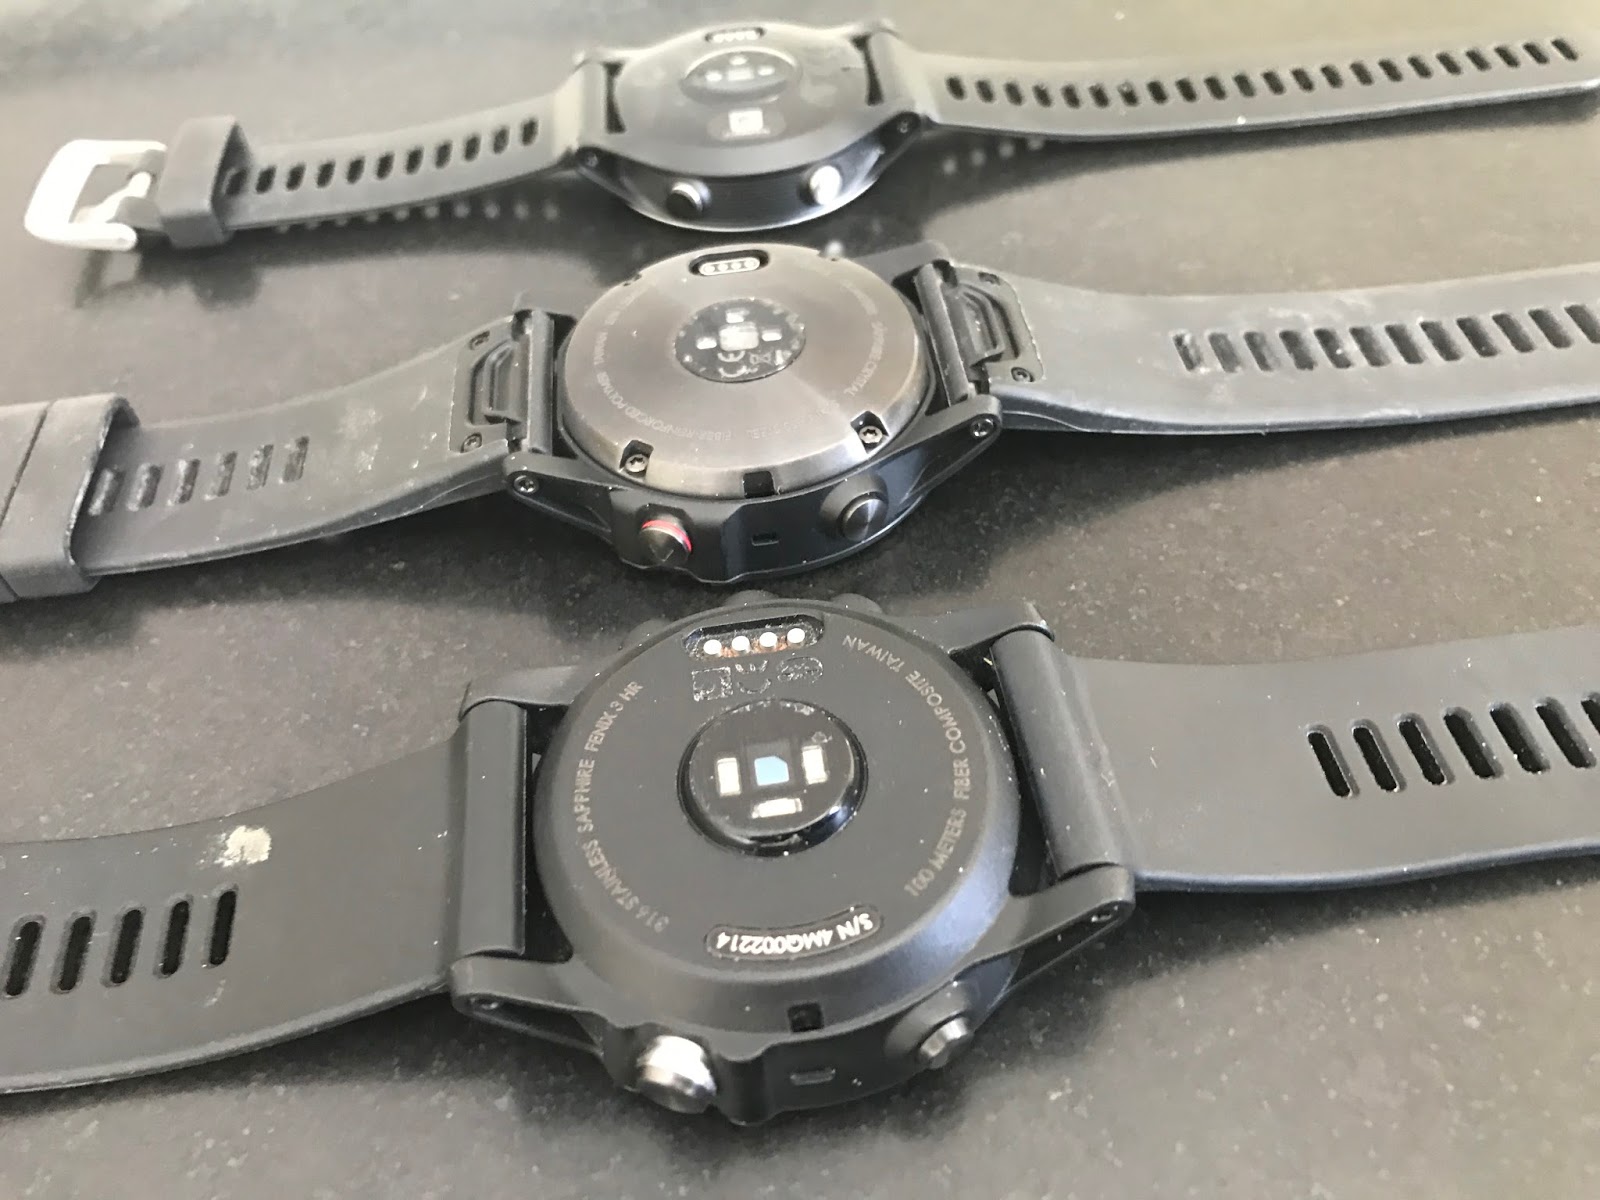 Trail Run: Garmin Fenix 5X, Forerunner 935, Running Pod-Reviews and Comparisons. In Action! Which to Choose and Why.